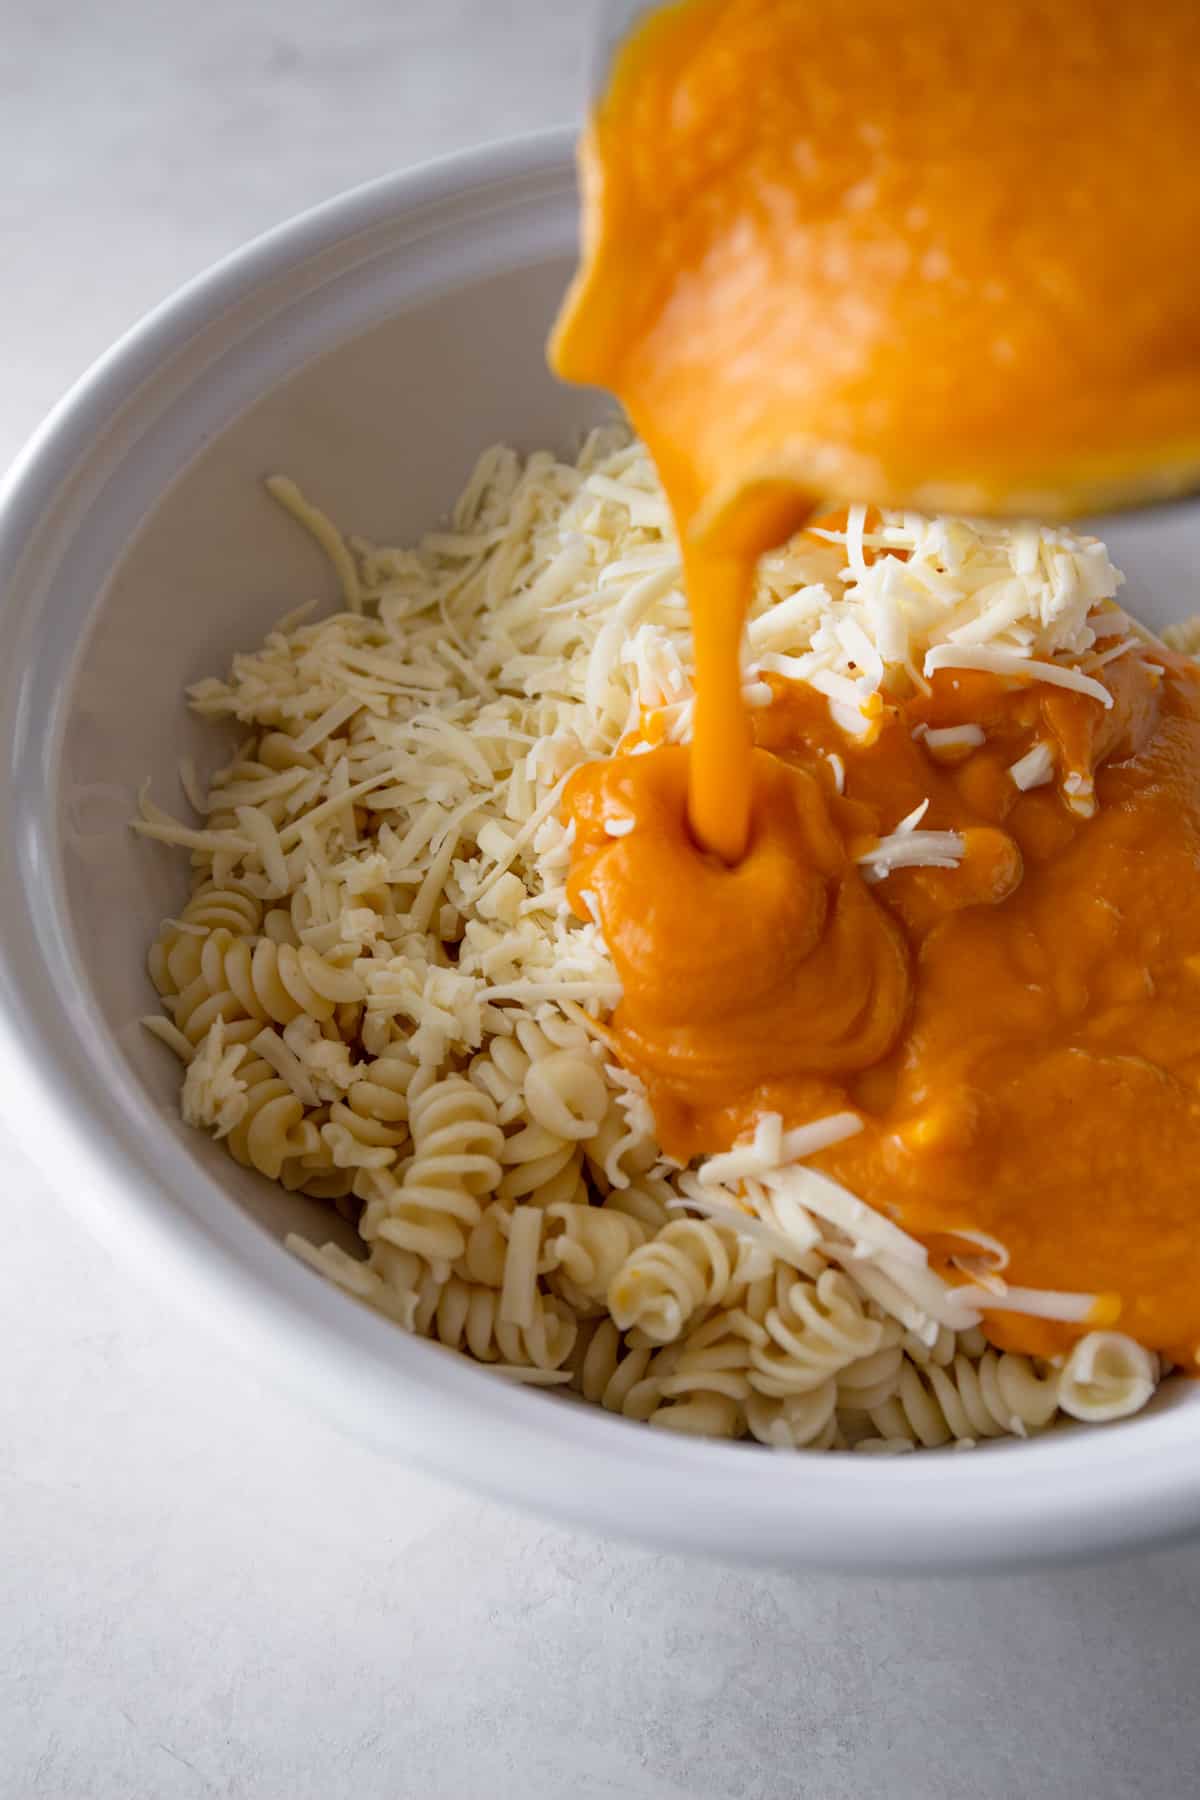 Pouring sweet potato puree over pasta and cheese in a large white mixing bowl